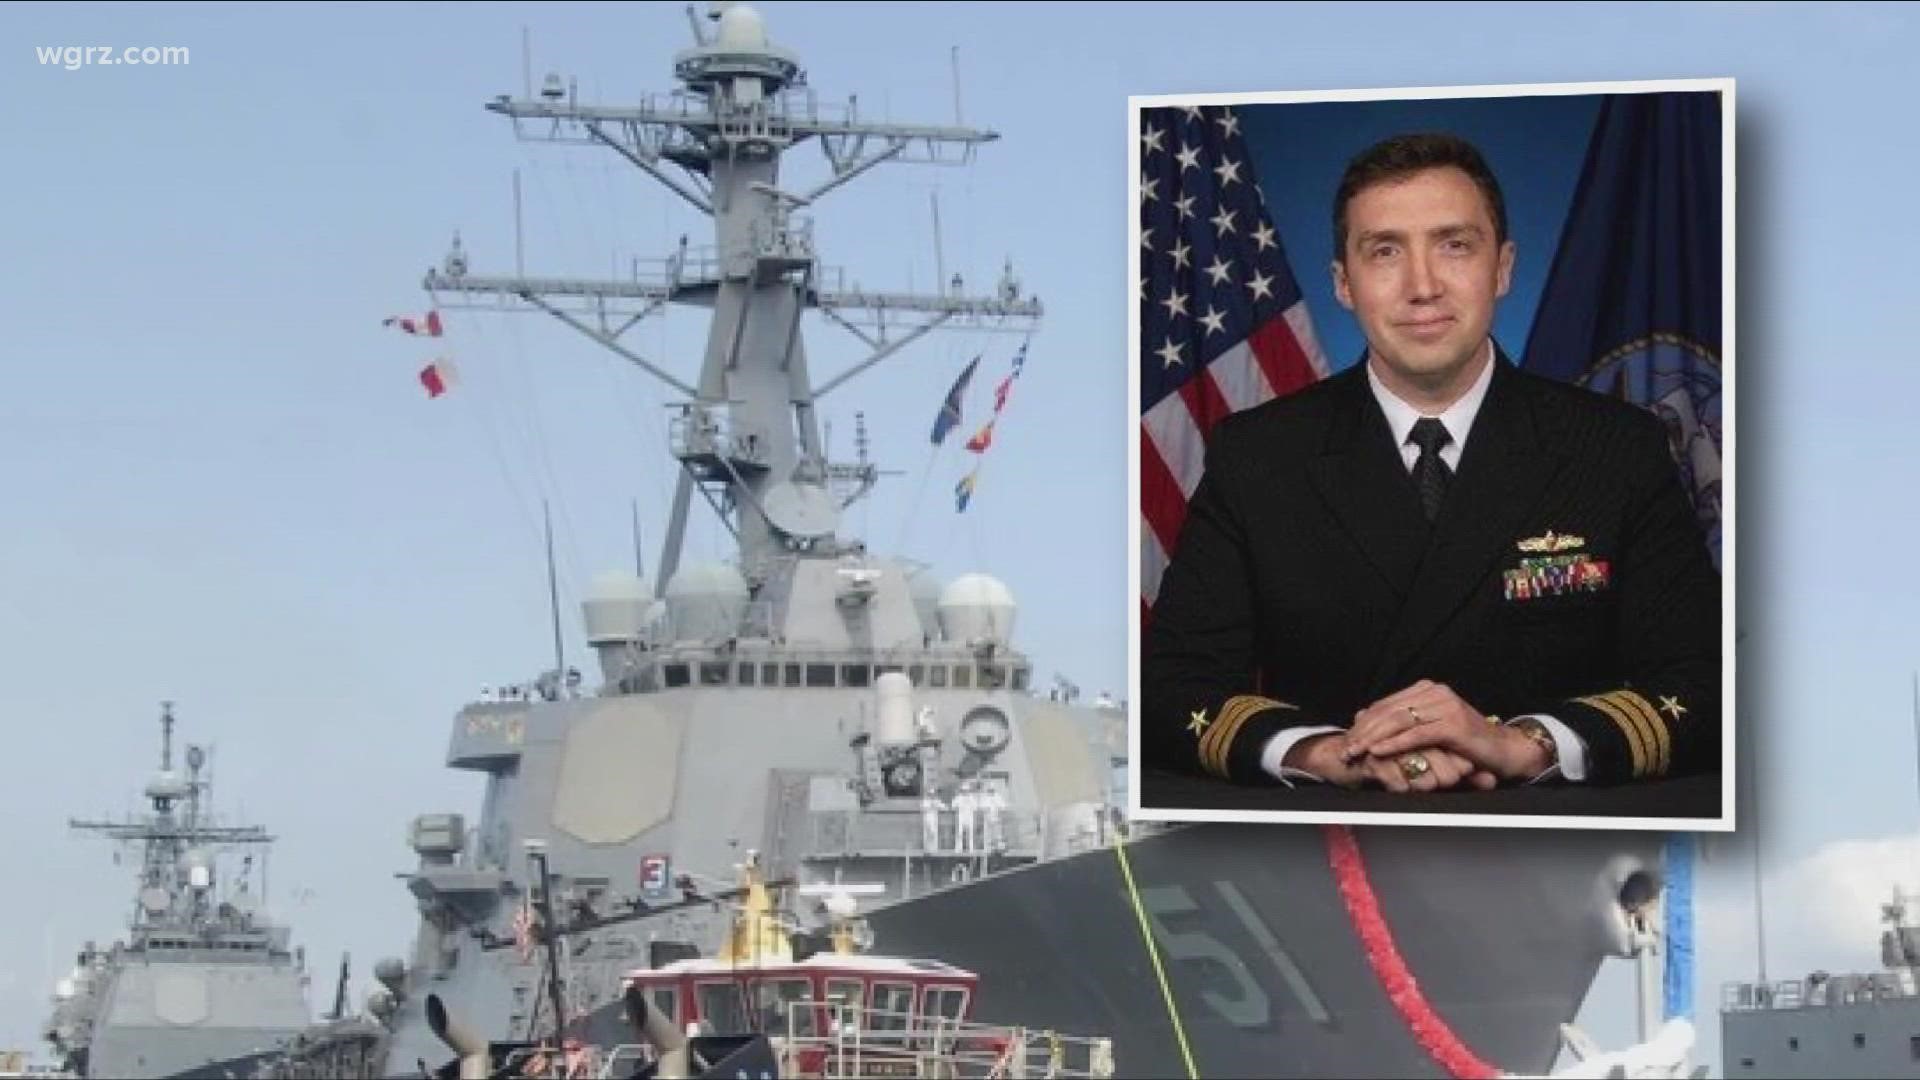 Commander Peter Flynn brother of District Attorney John Flynn is now the commanding officer of the USS Arliegh Burke following a change of command ceremony.